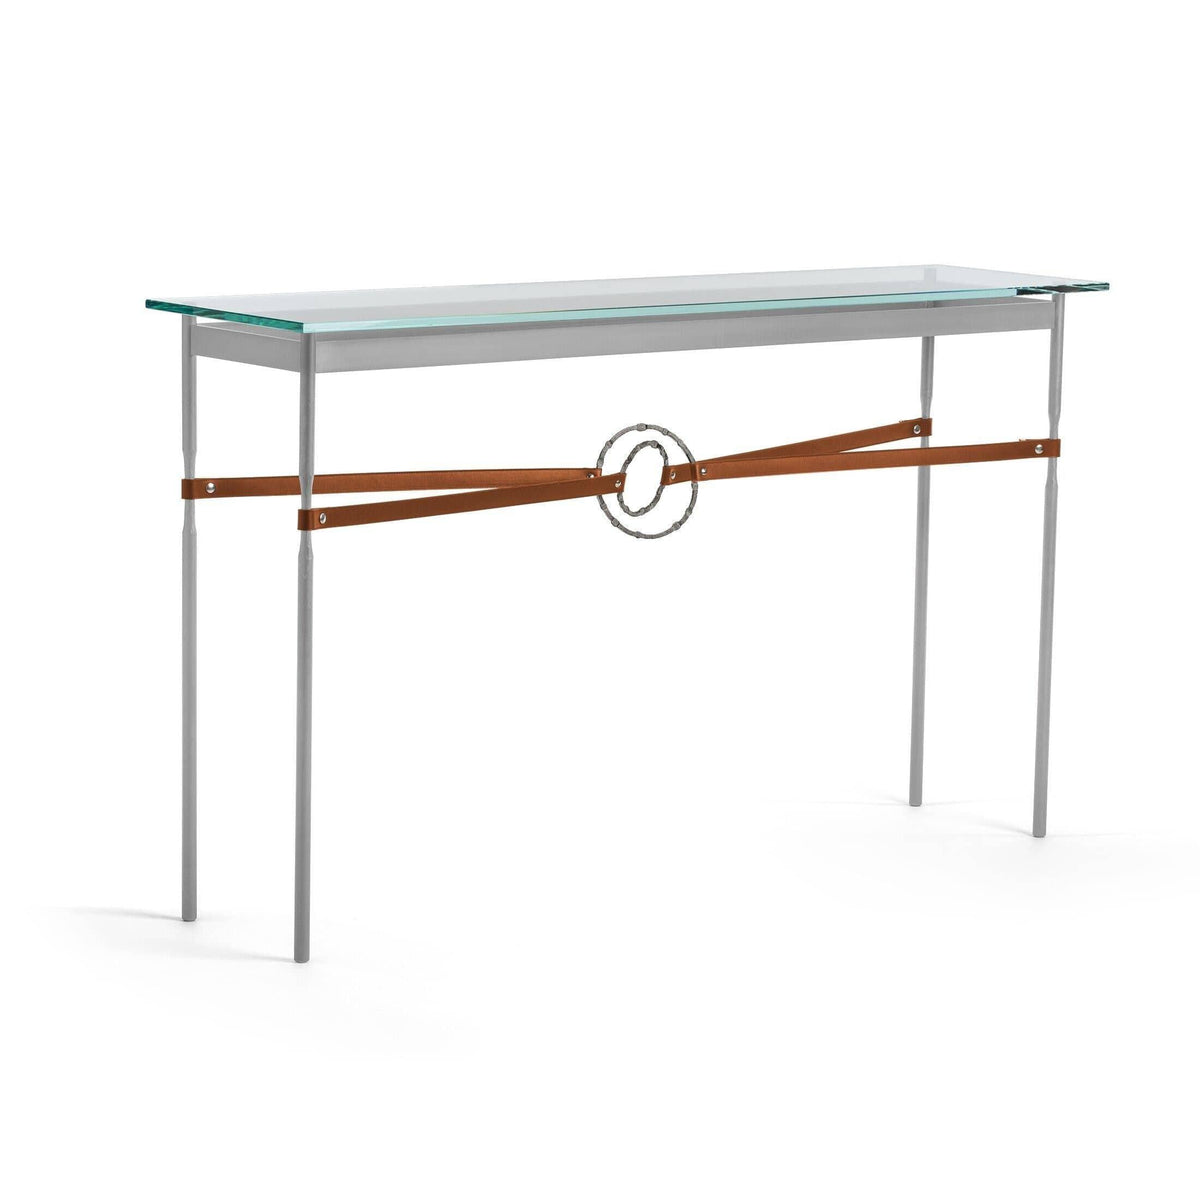 Hubbardton Forge - Equus Chestnut Leather Console Table - 750118-82-20-LC-VA0714 | Montreal Lighting & Hardware